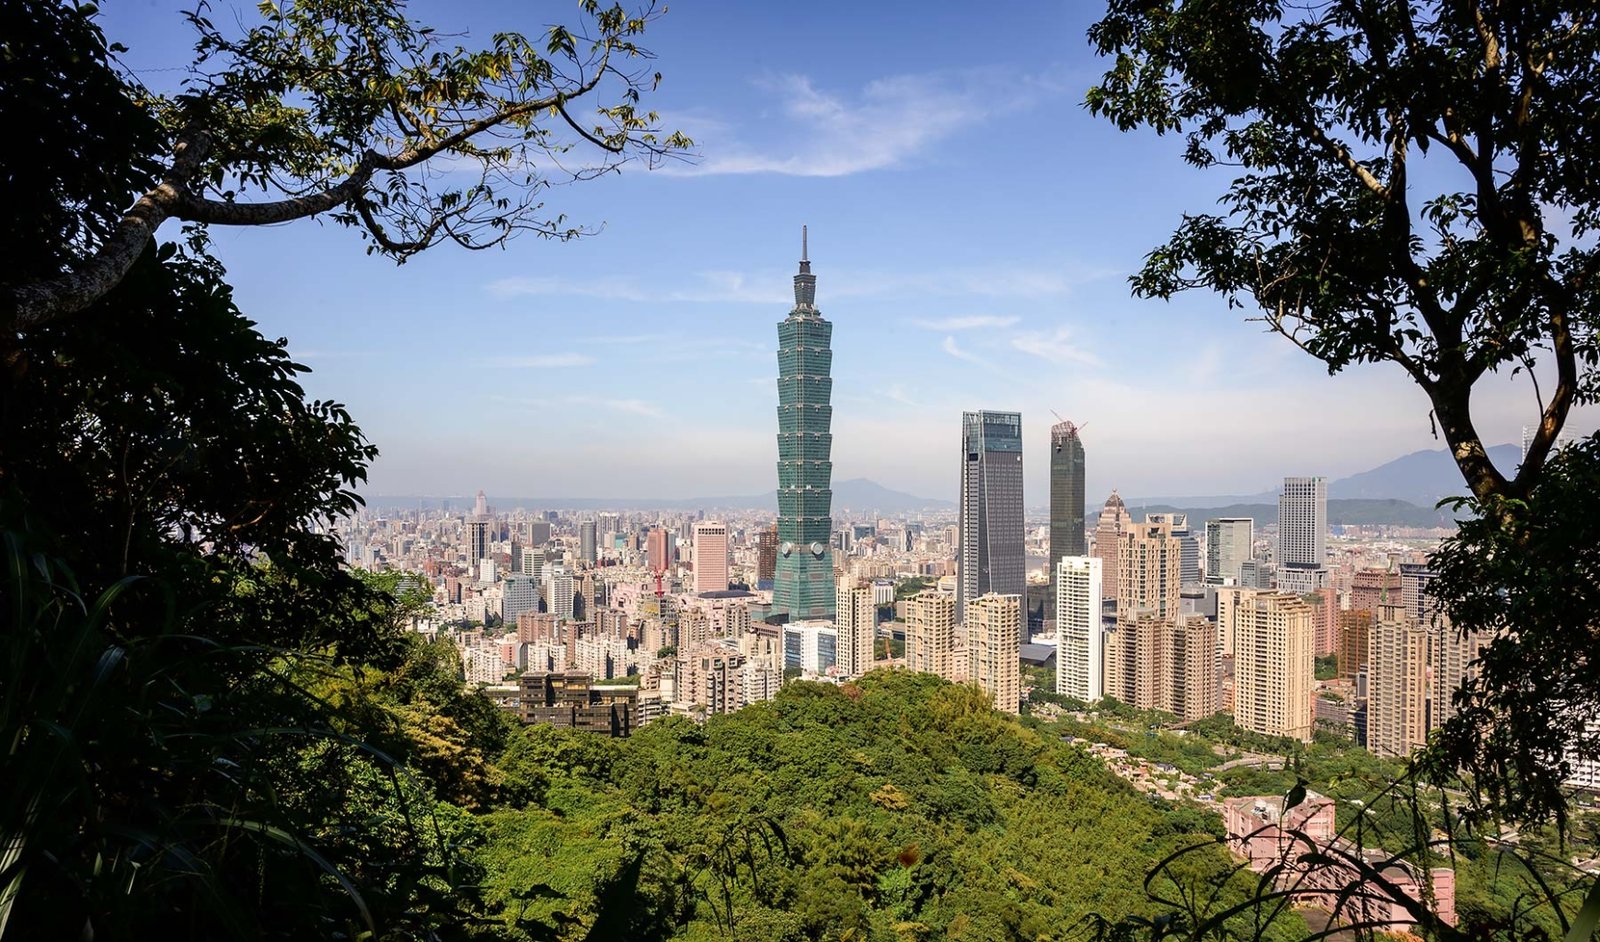 View of Taipei from Elephant Mountain. Taiwan itinerary for 2-3 weeks